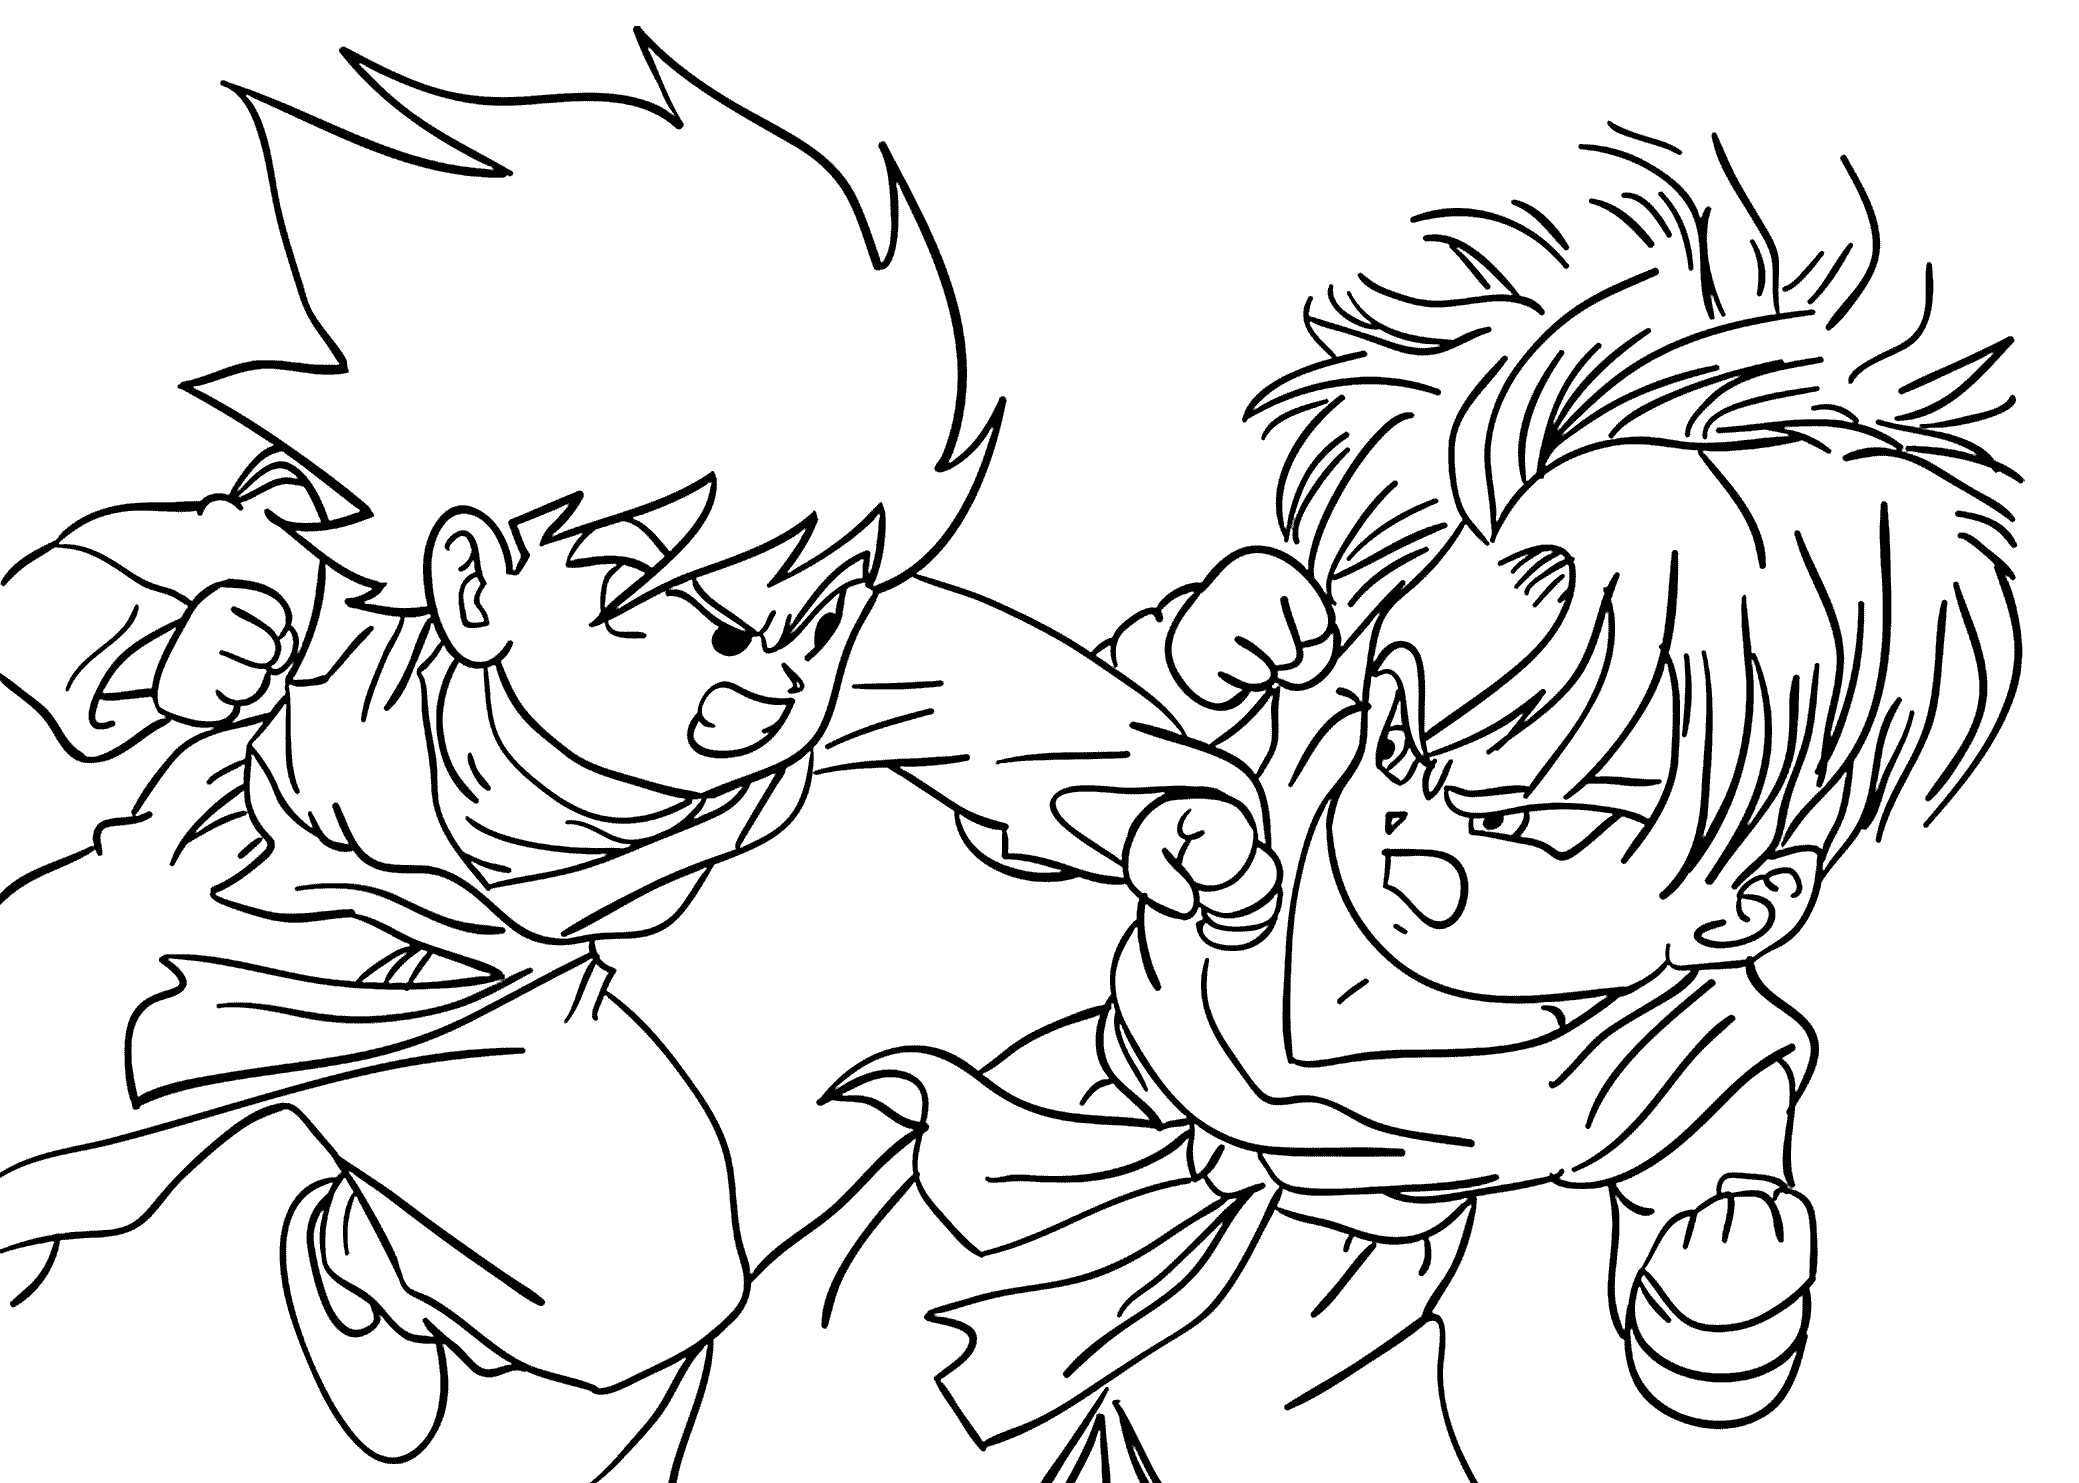 Dragonball Z Coloring Pages (17 Pictures) - Colorine.net | 22909